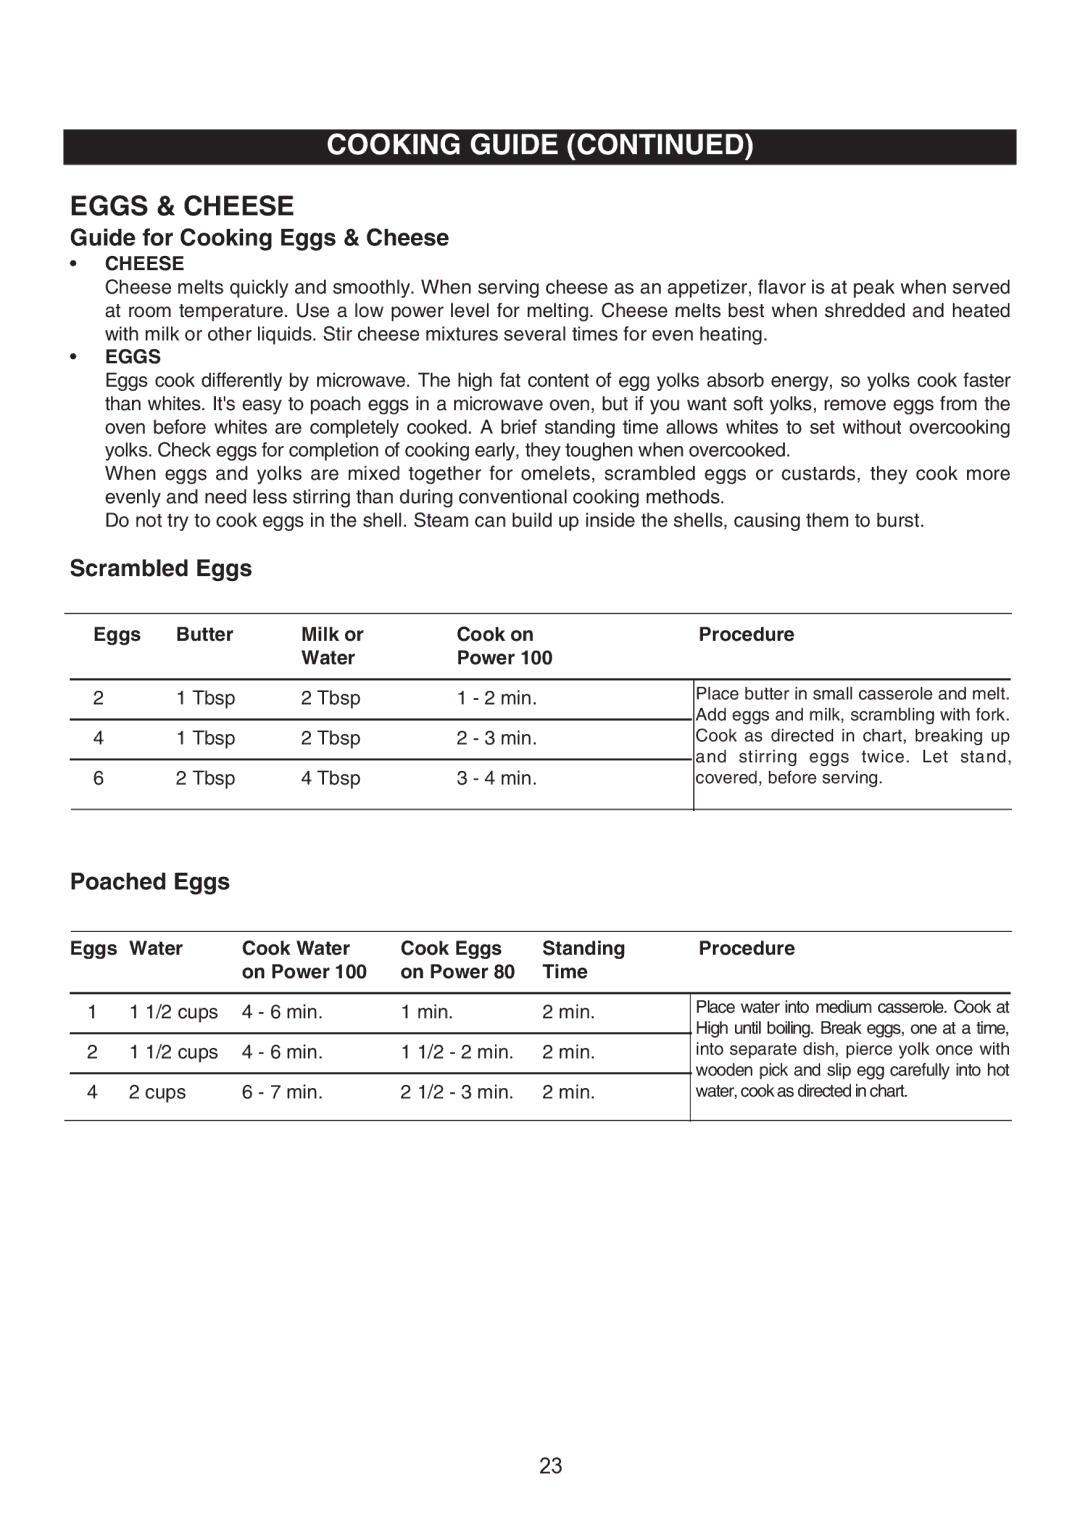 Emerson MW8119SBM owner manual Guide for Cooking Eggs & Cheese, Scrambled Eggs, Poached Eggs 